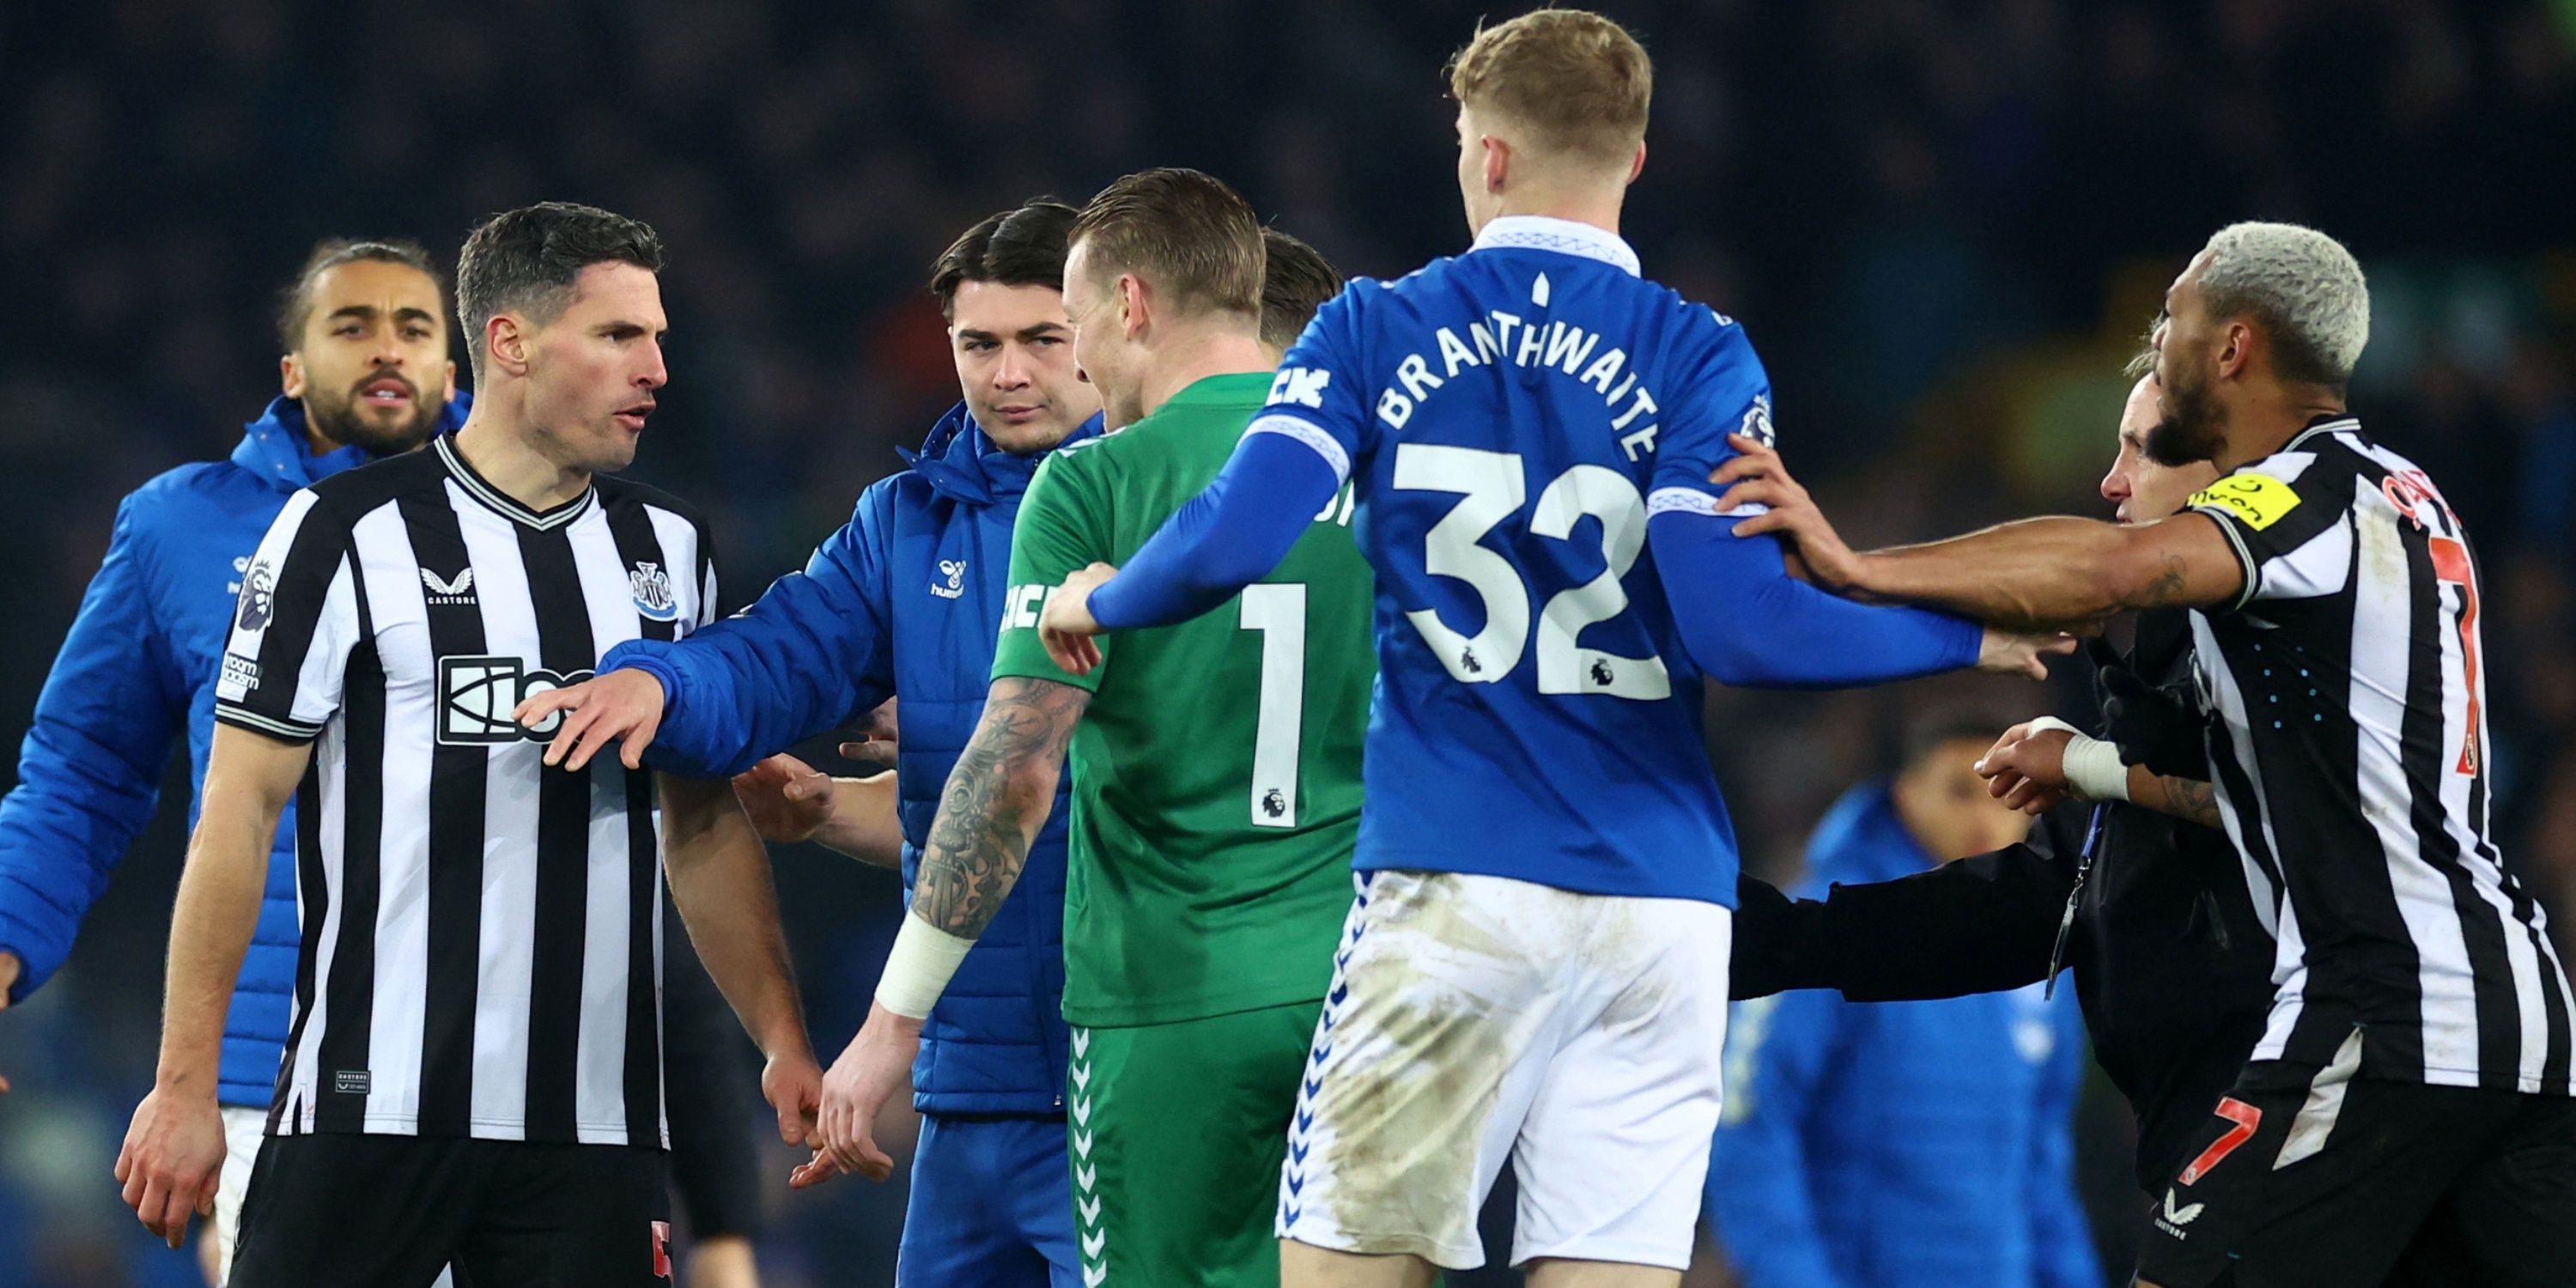 Jordan Pickford clashes with Newcastle players